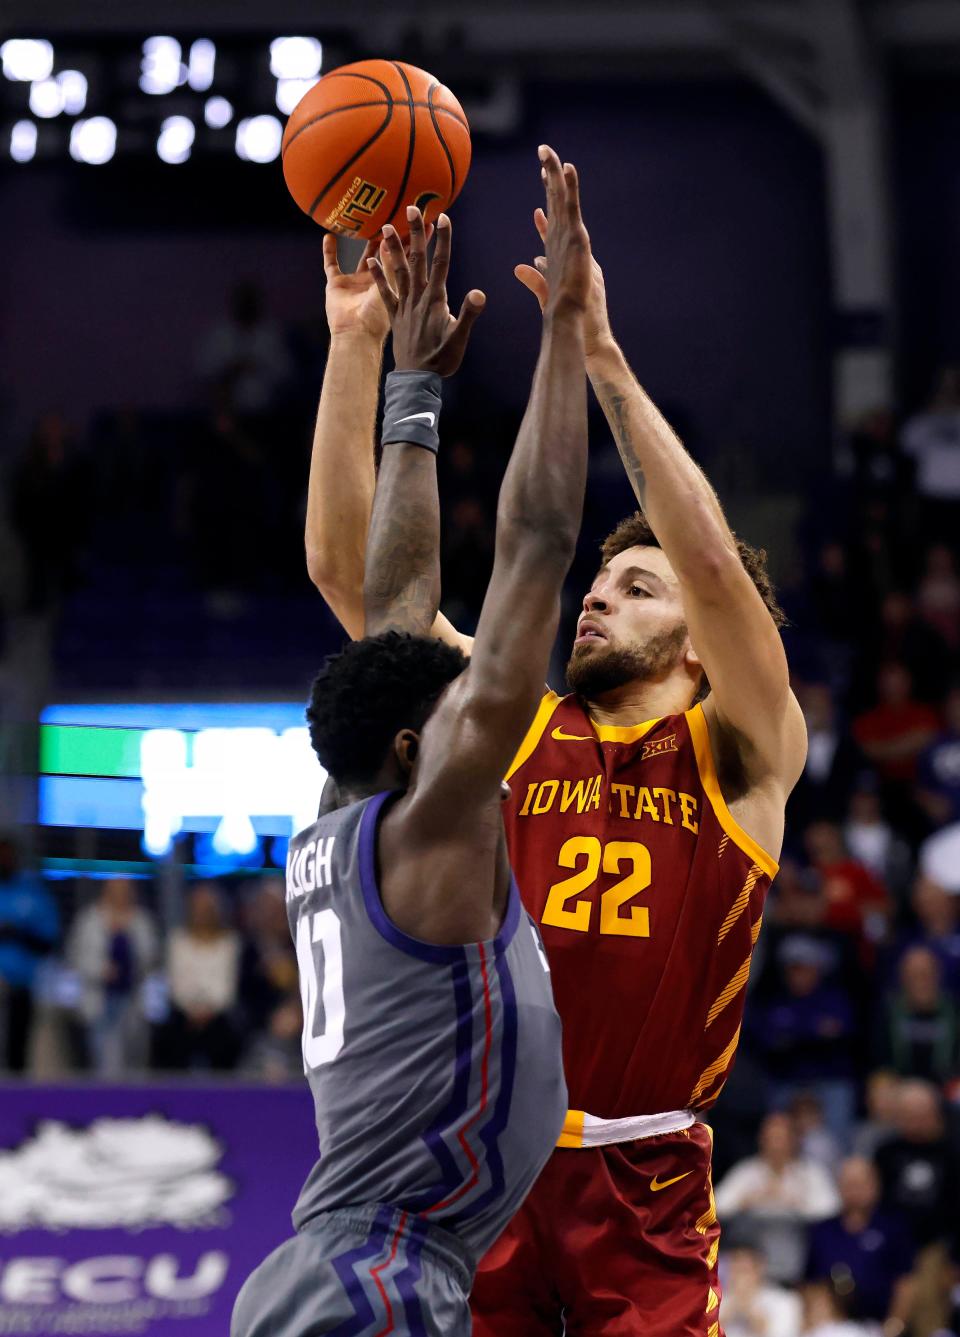 Iowa State guard Gabe Kalscheur (22) makes the game-winning shot over TCU guard Damion Baugh (10) on Saturday in Fort Worth, Texas. Iowa State won 69-67.